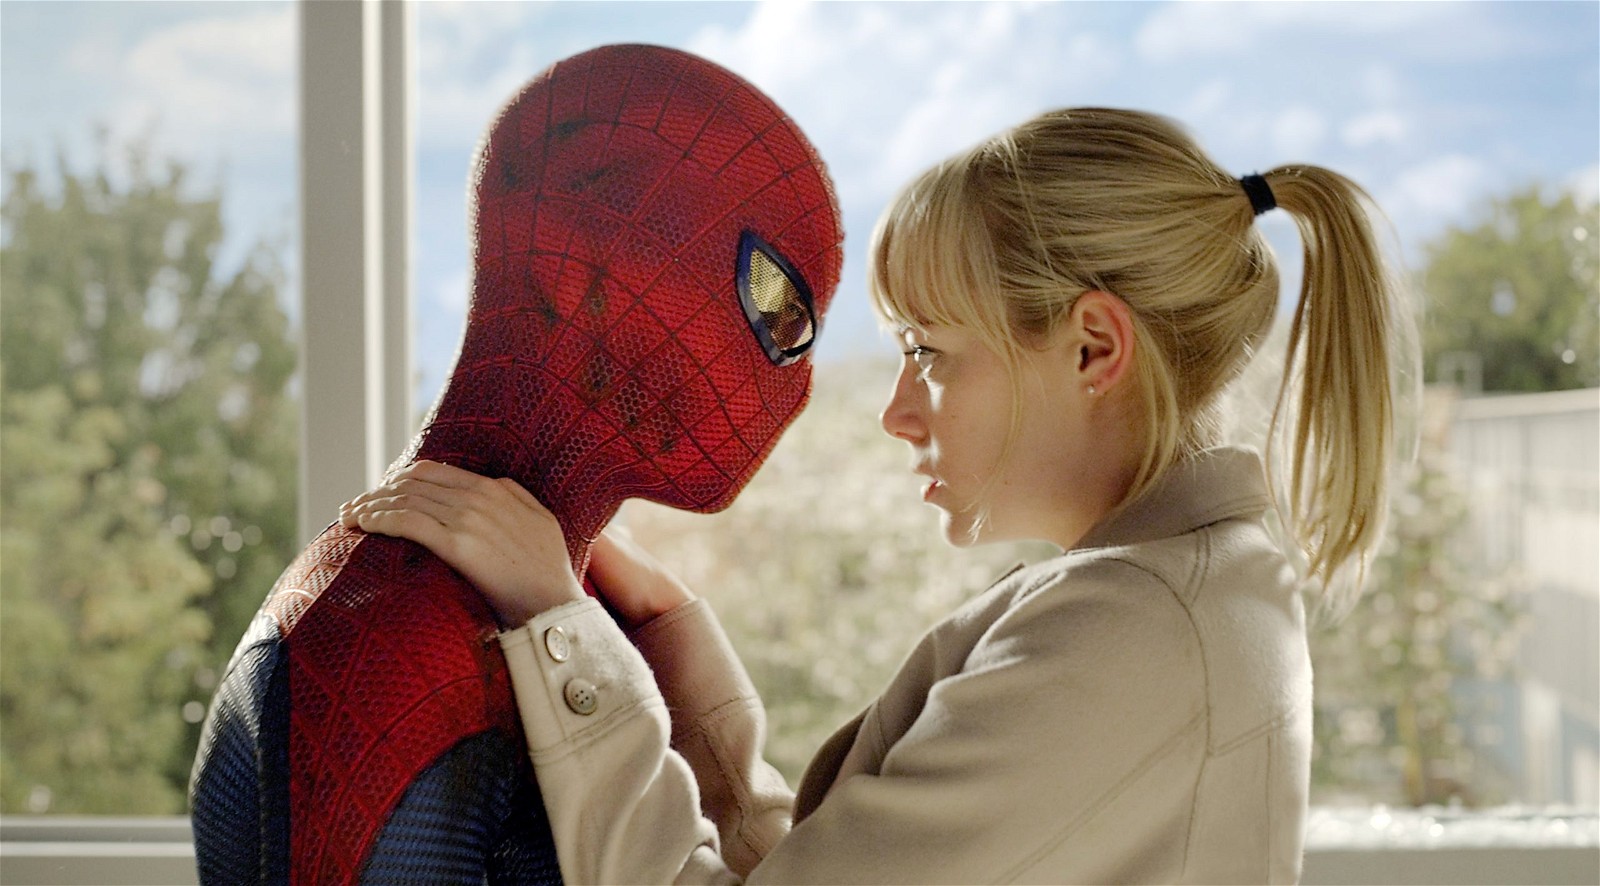 Emma Watson and Andrew Garfield in The Amazing Spider-Man